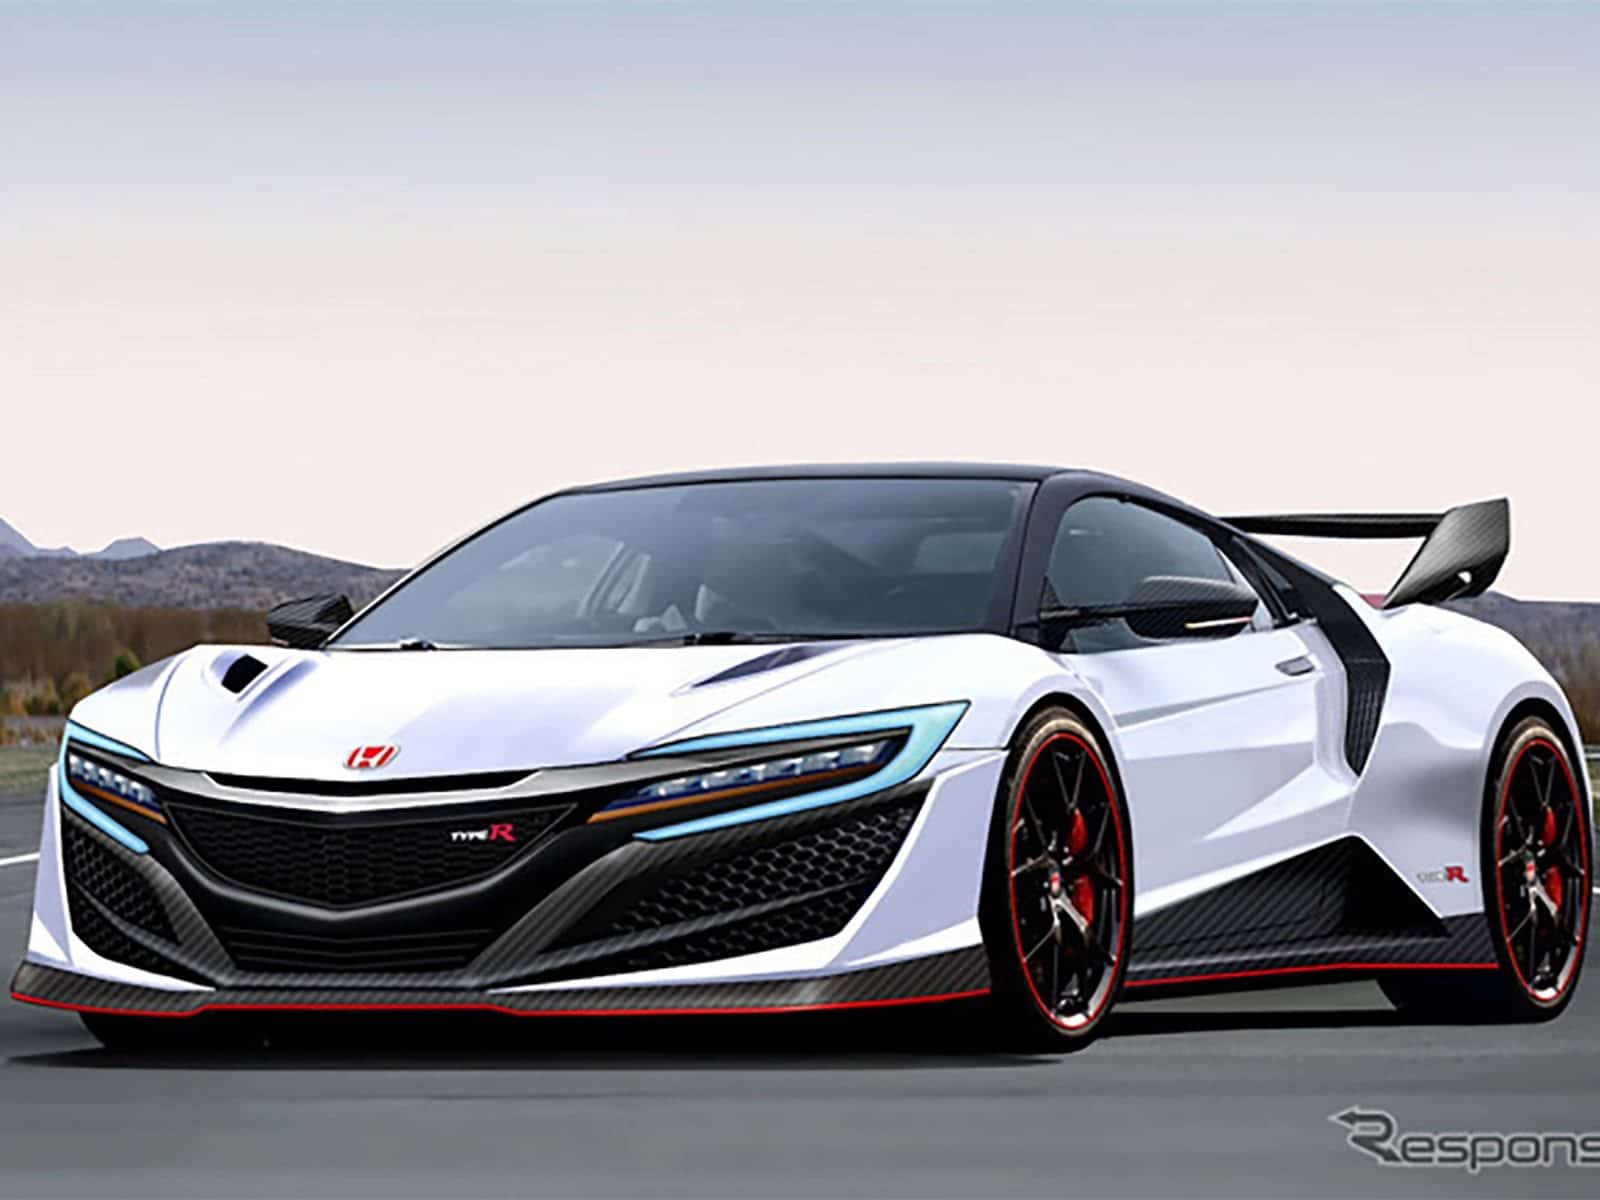 Acura NSX Type R And Spider Headed Our Way In Late 2021? - Motor Illustrated